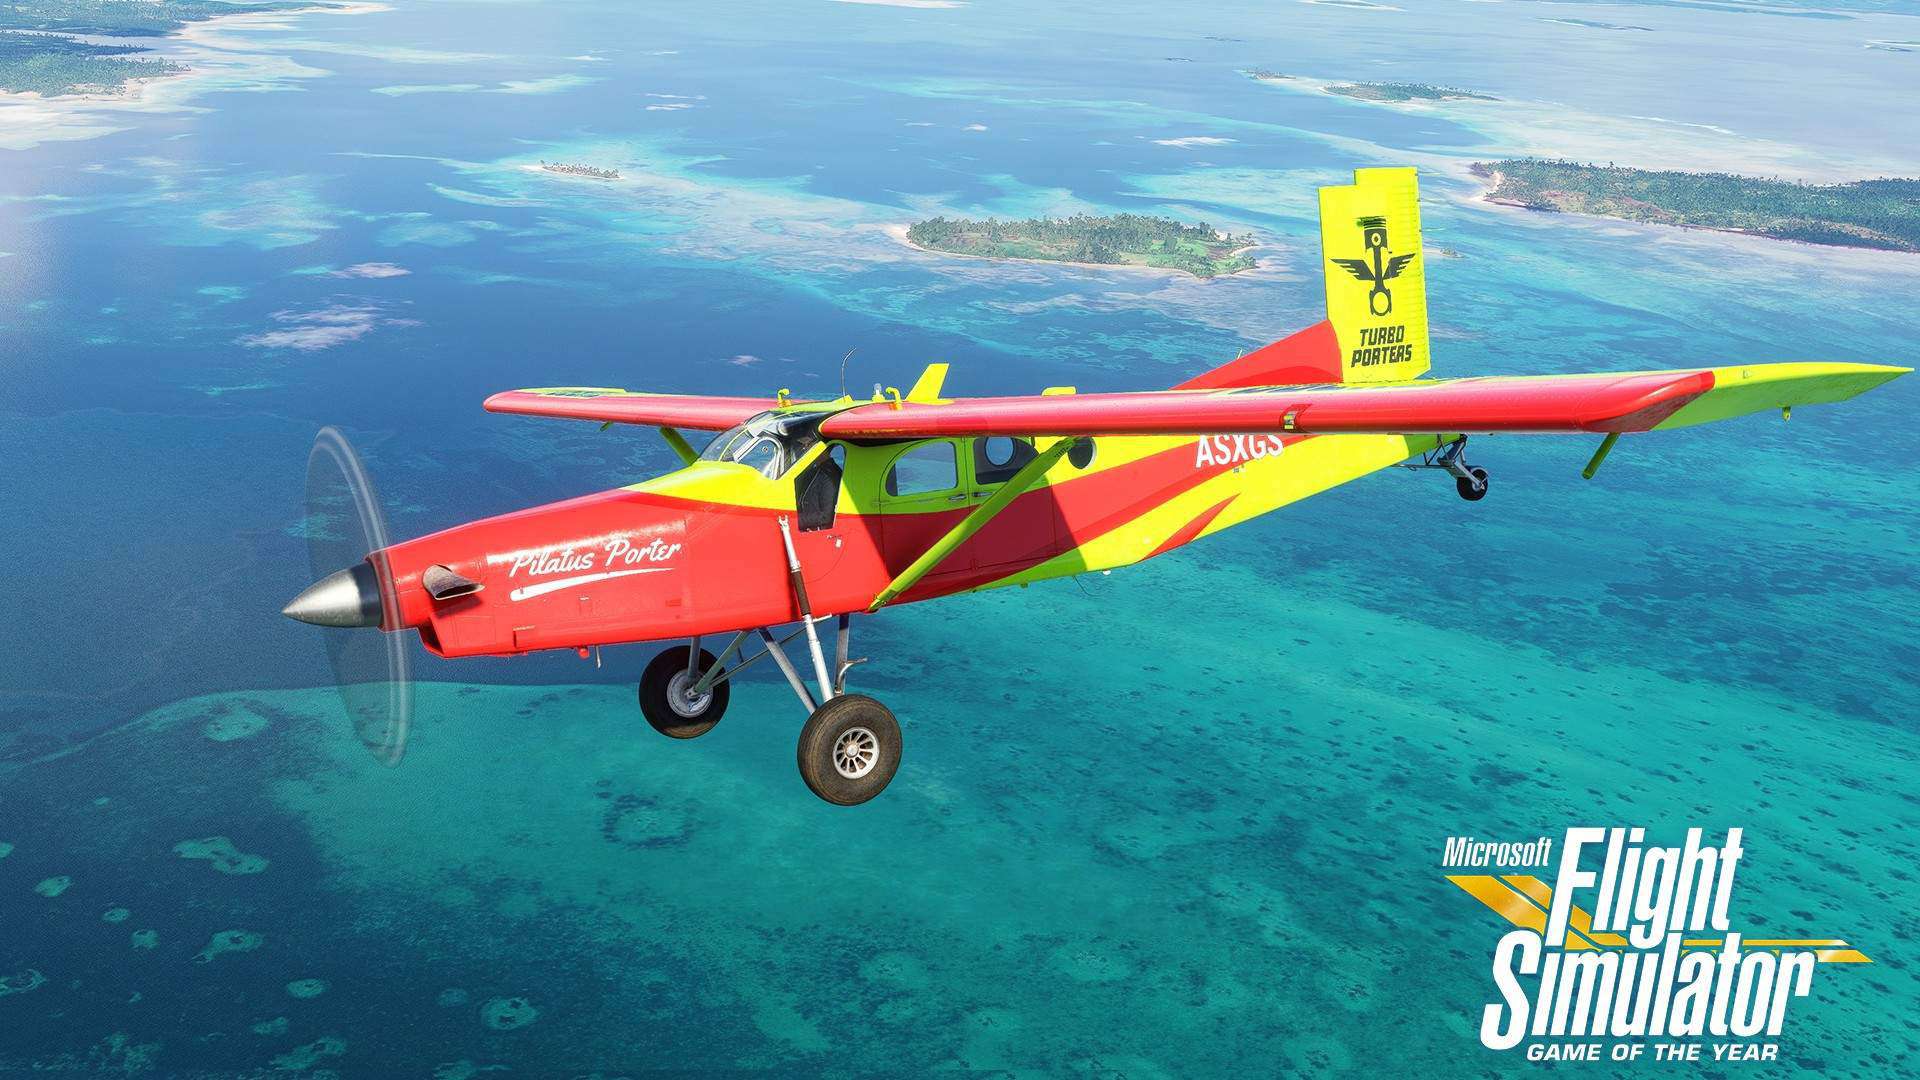 image for Coming Soon: Microsoft Flight Simulator Game of the Year Edition